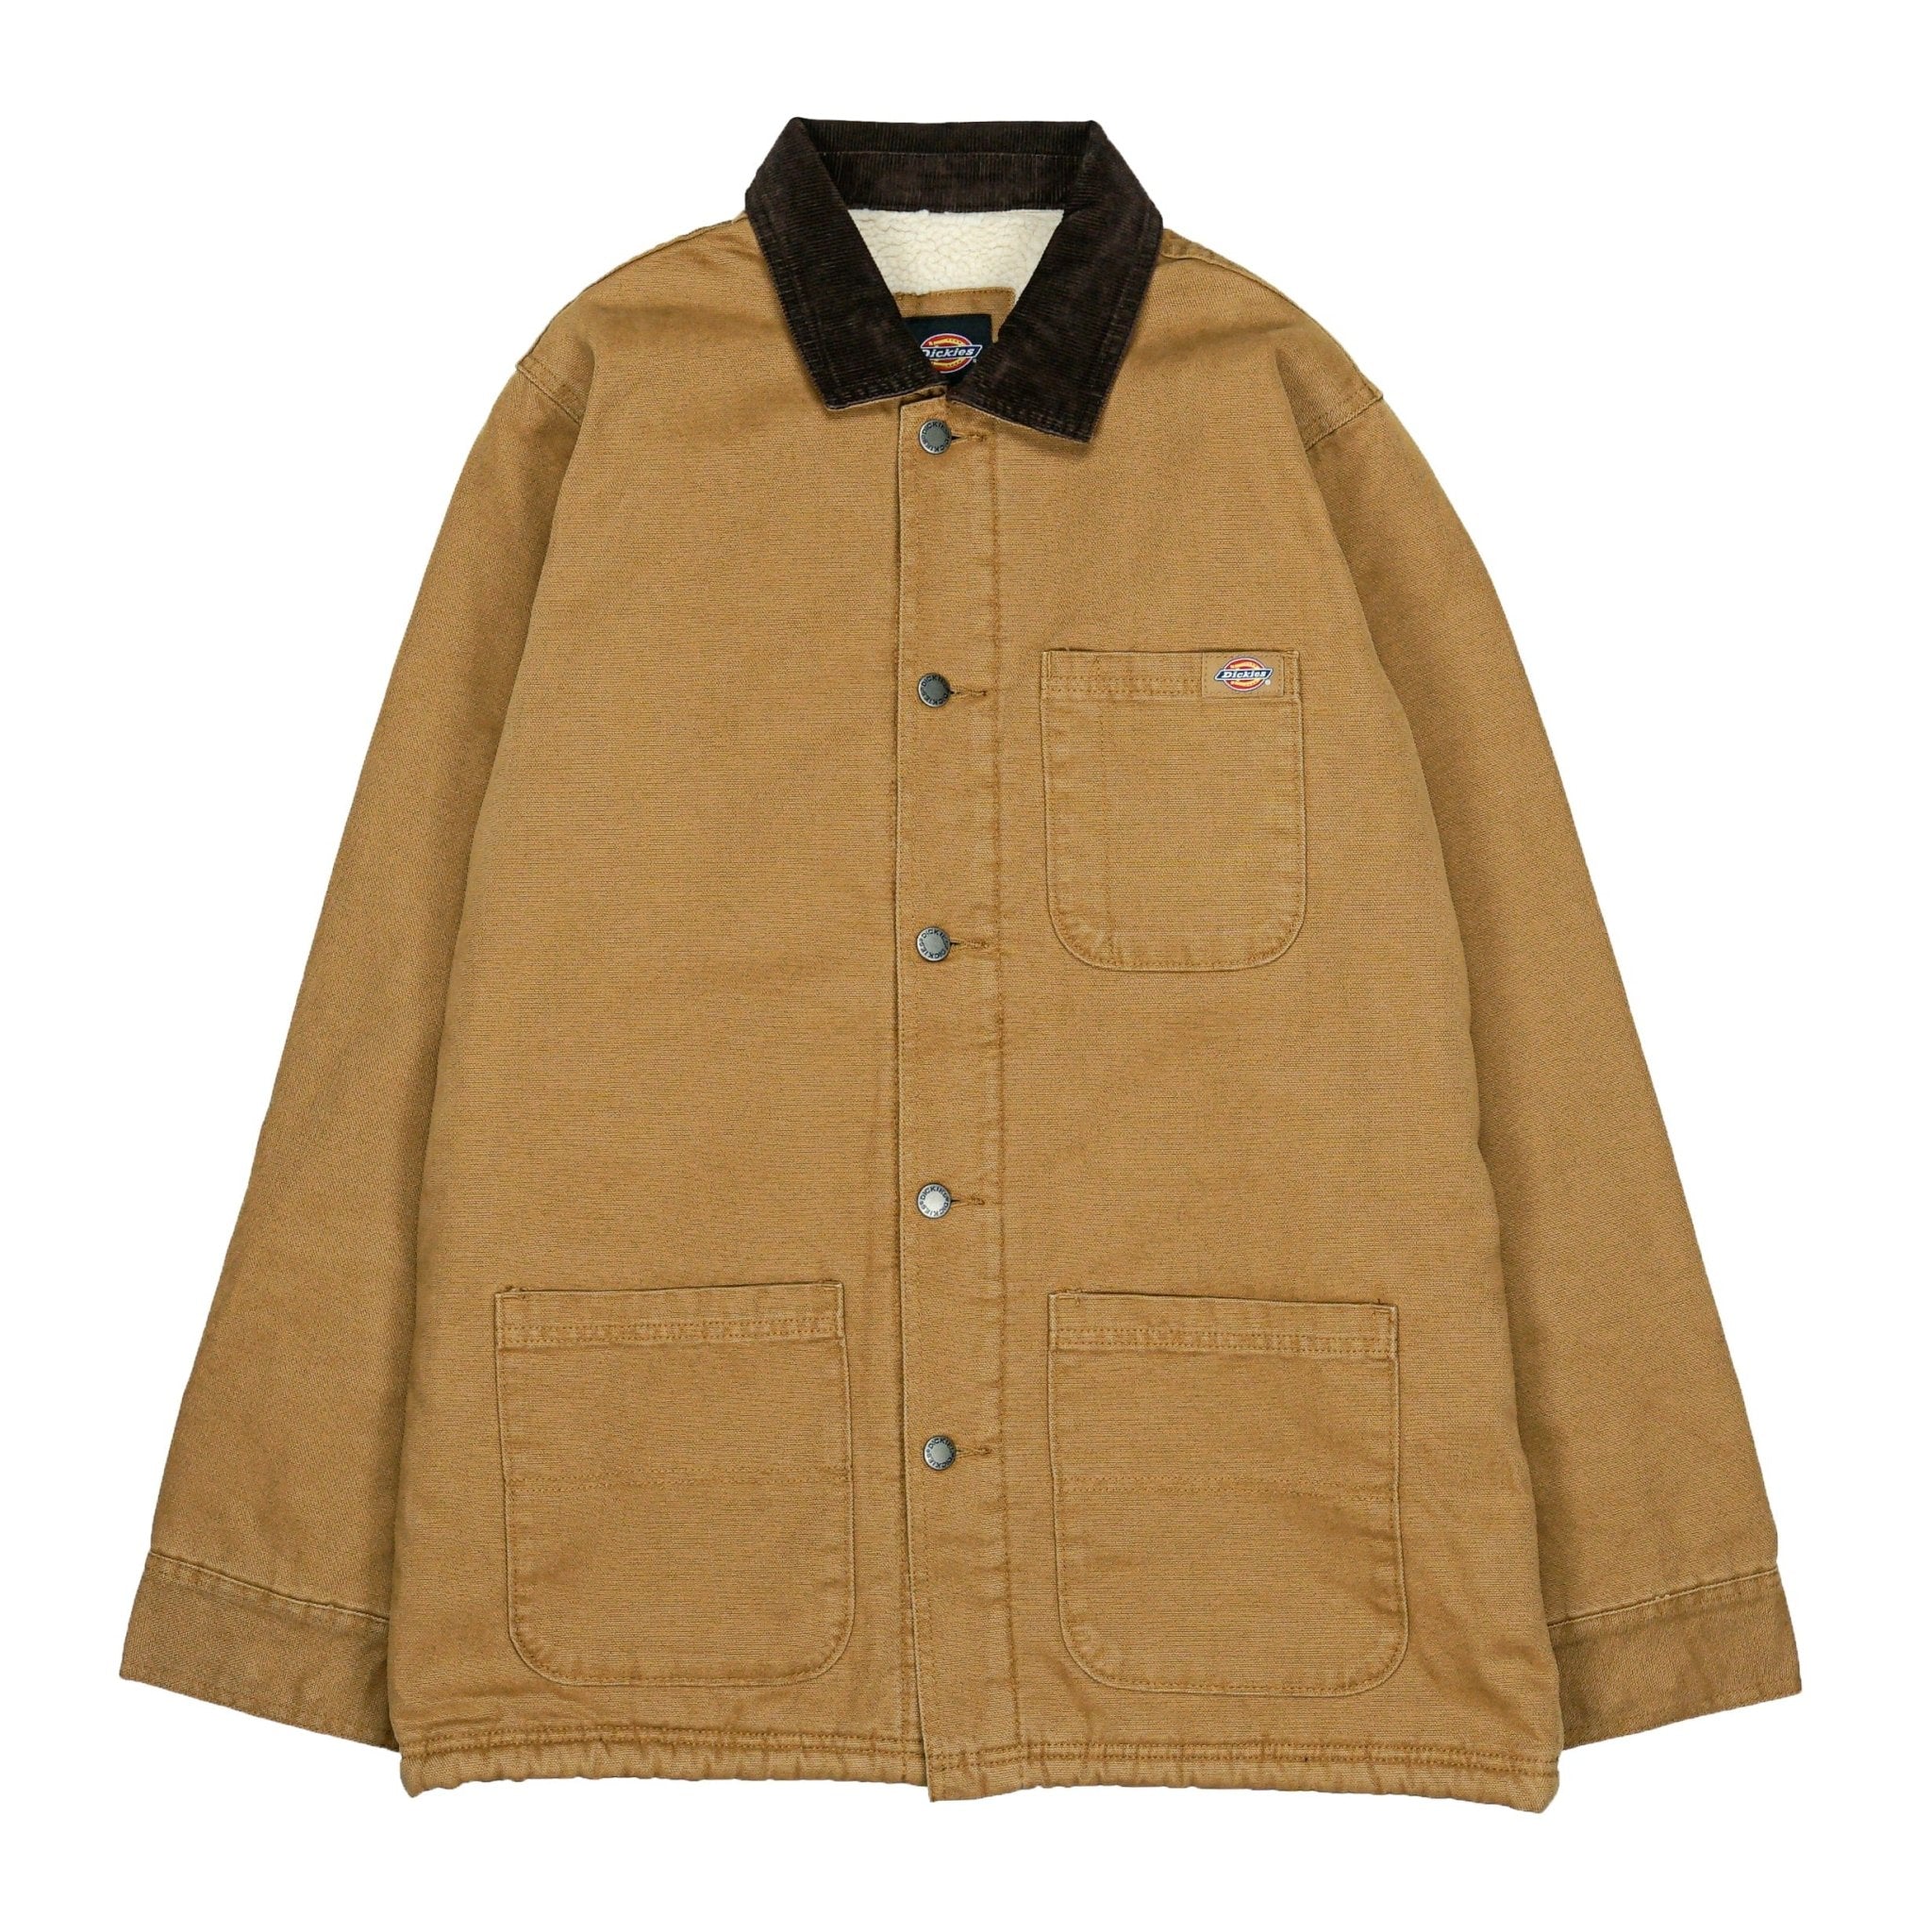 Duck Canvas Chore Coat in stonewashed brown duck